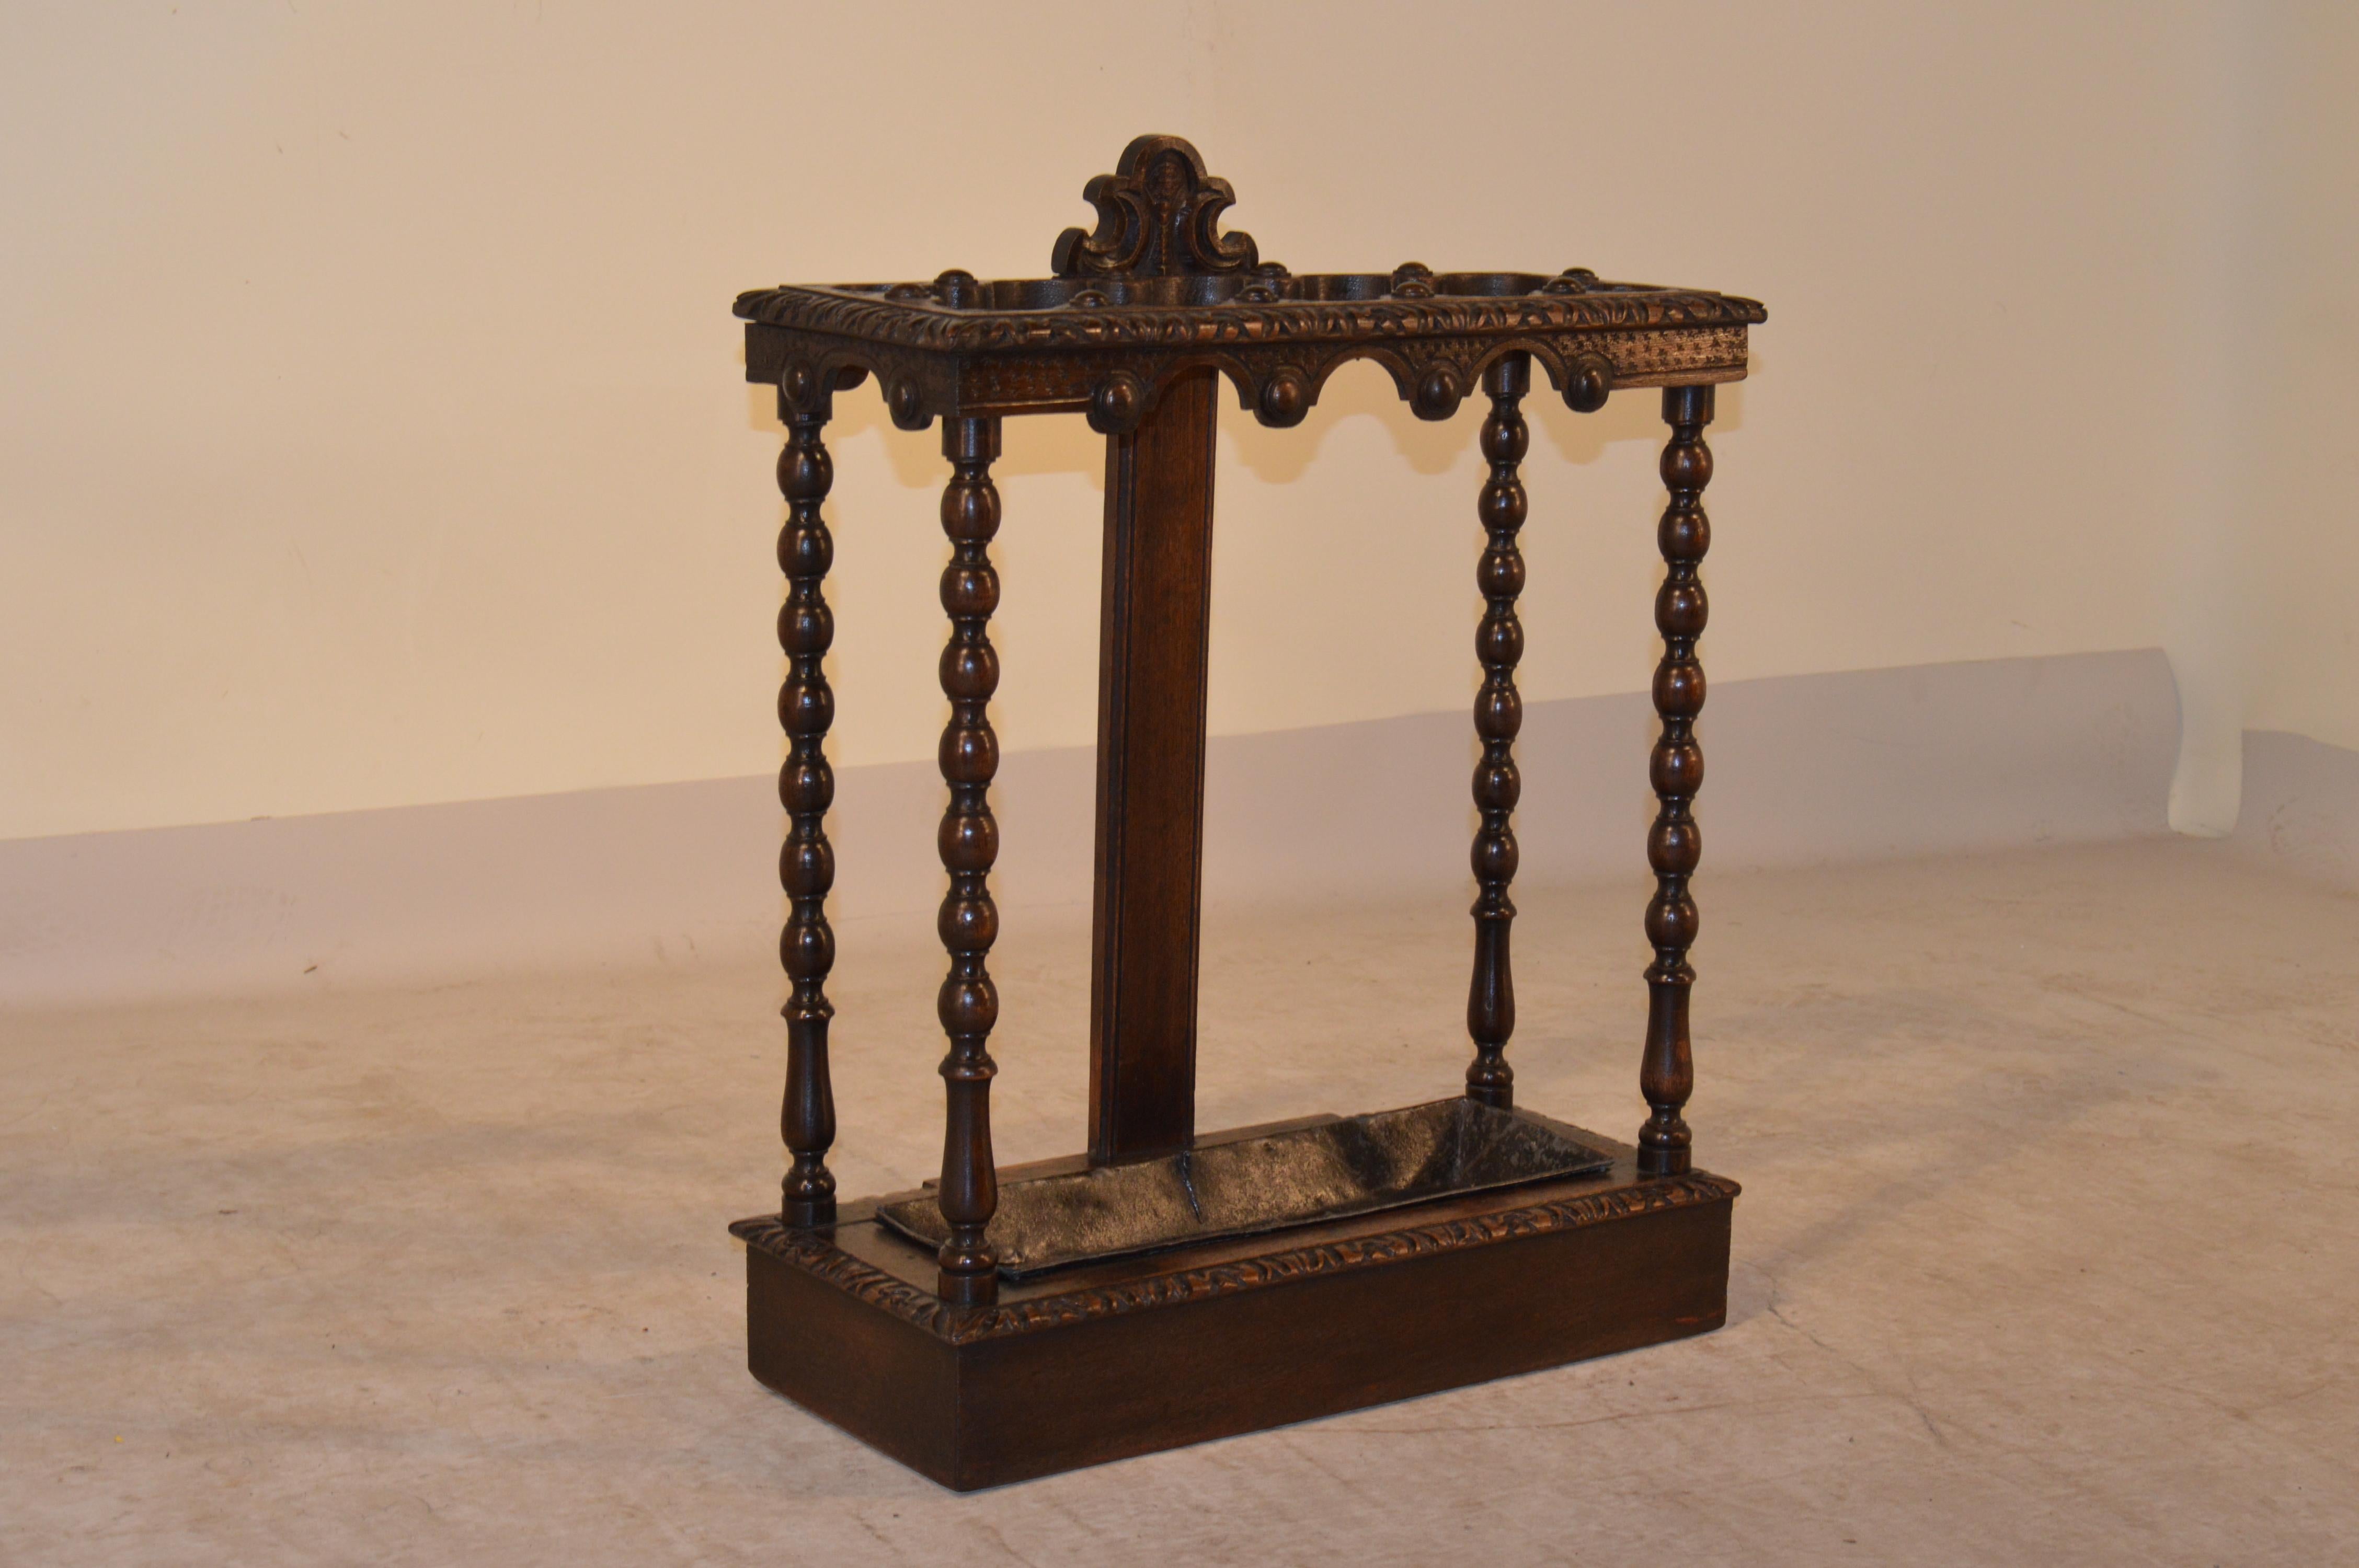 19th century English oak umbrella stand with a heavily carved top which is scalloped in sections for umbrella or cane storage. The apron is scalloped and carved to match. The legs are hand-turned in a spool design. The base is banded and has a